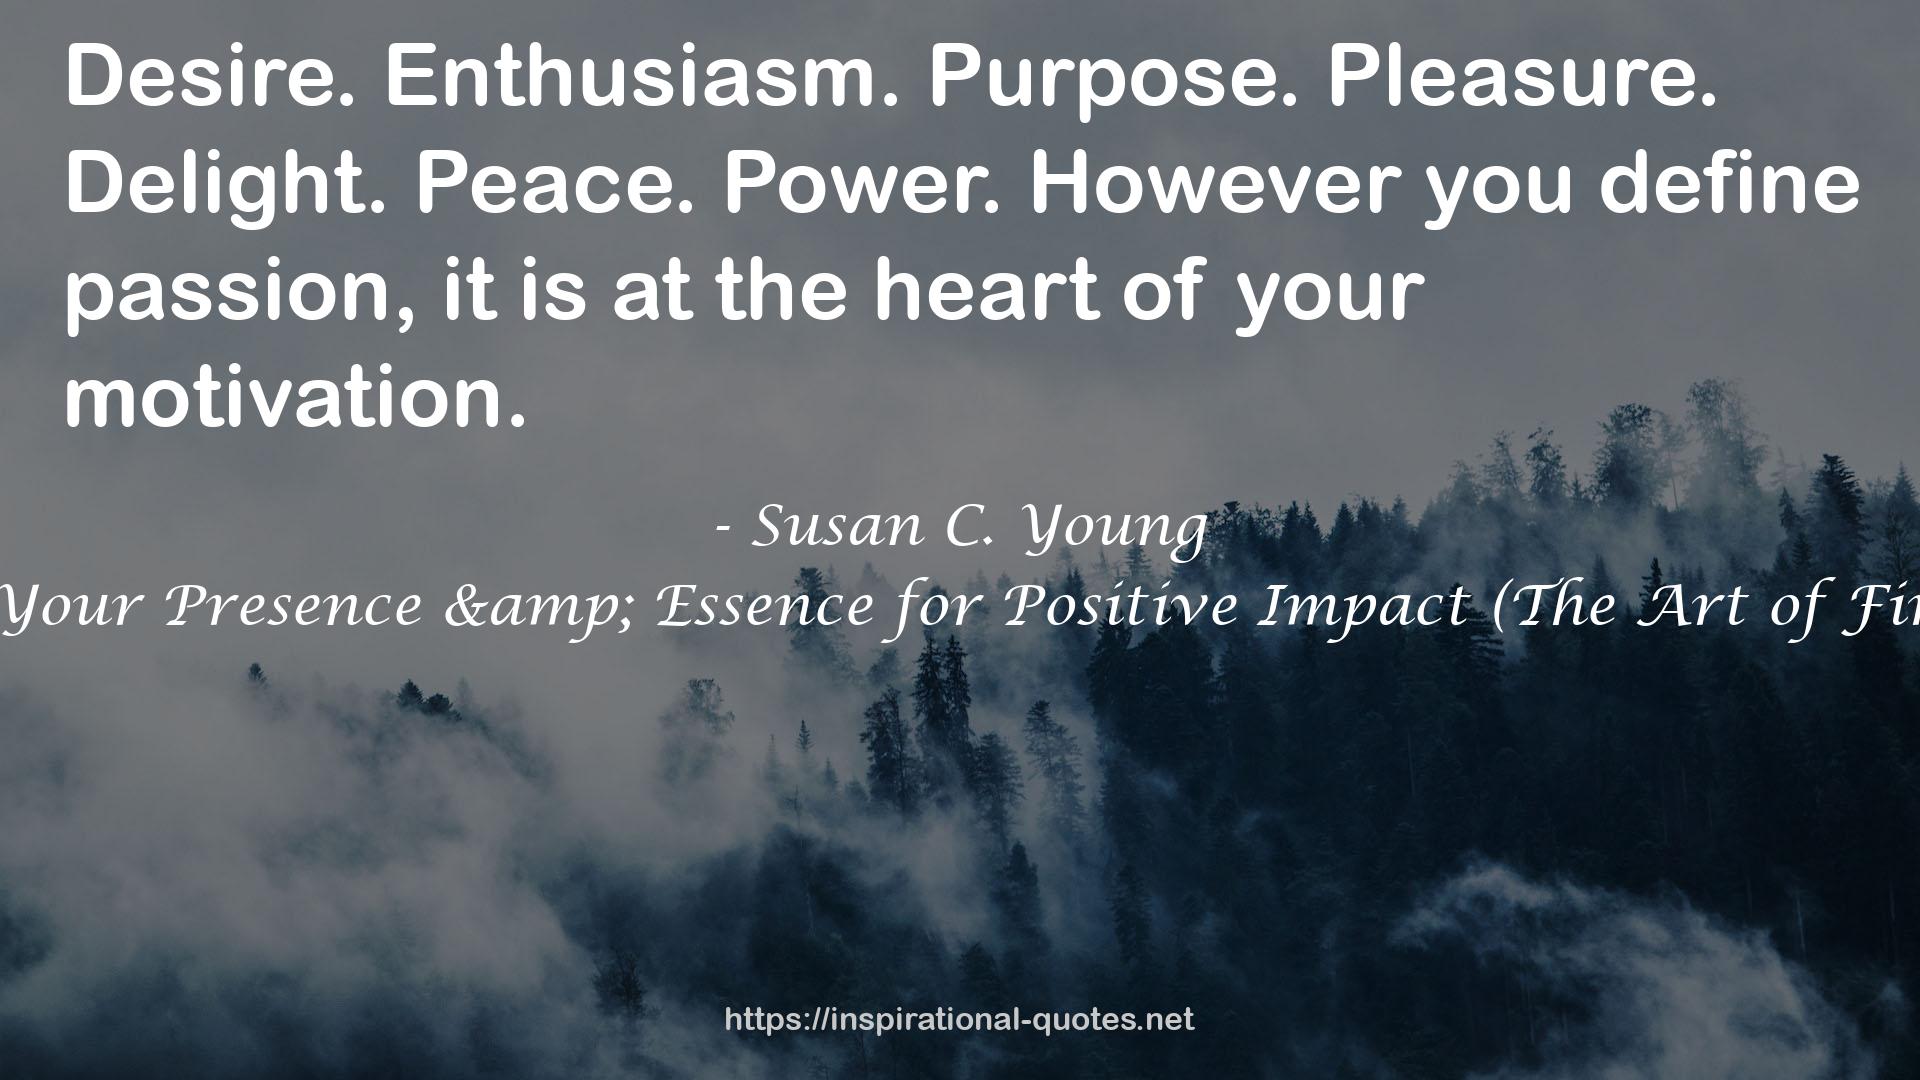 The Art of Being: 8 Ways to Optimize Your Presence & Essence for Positive Impact (The Art of First Impressions for Positive Impact, #1) QUOTES